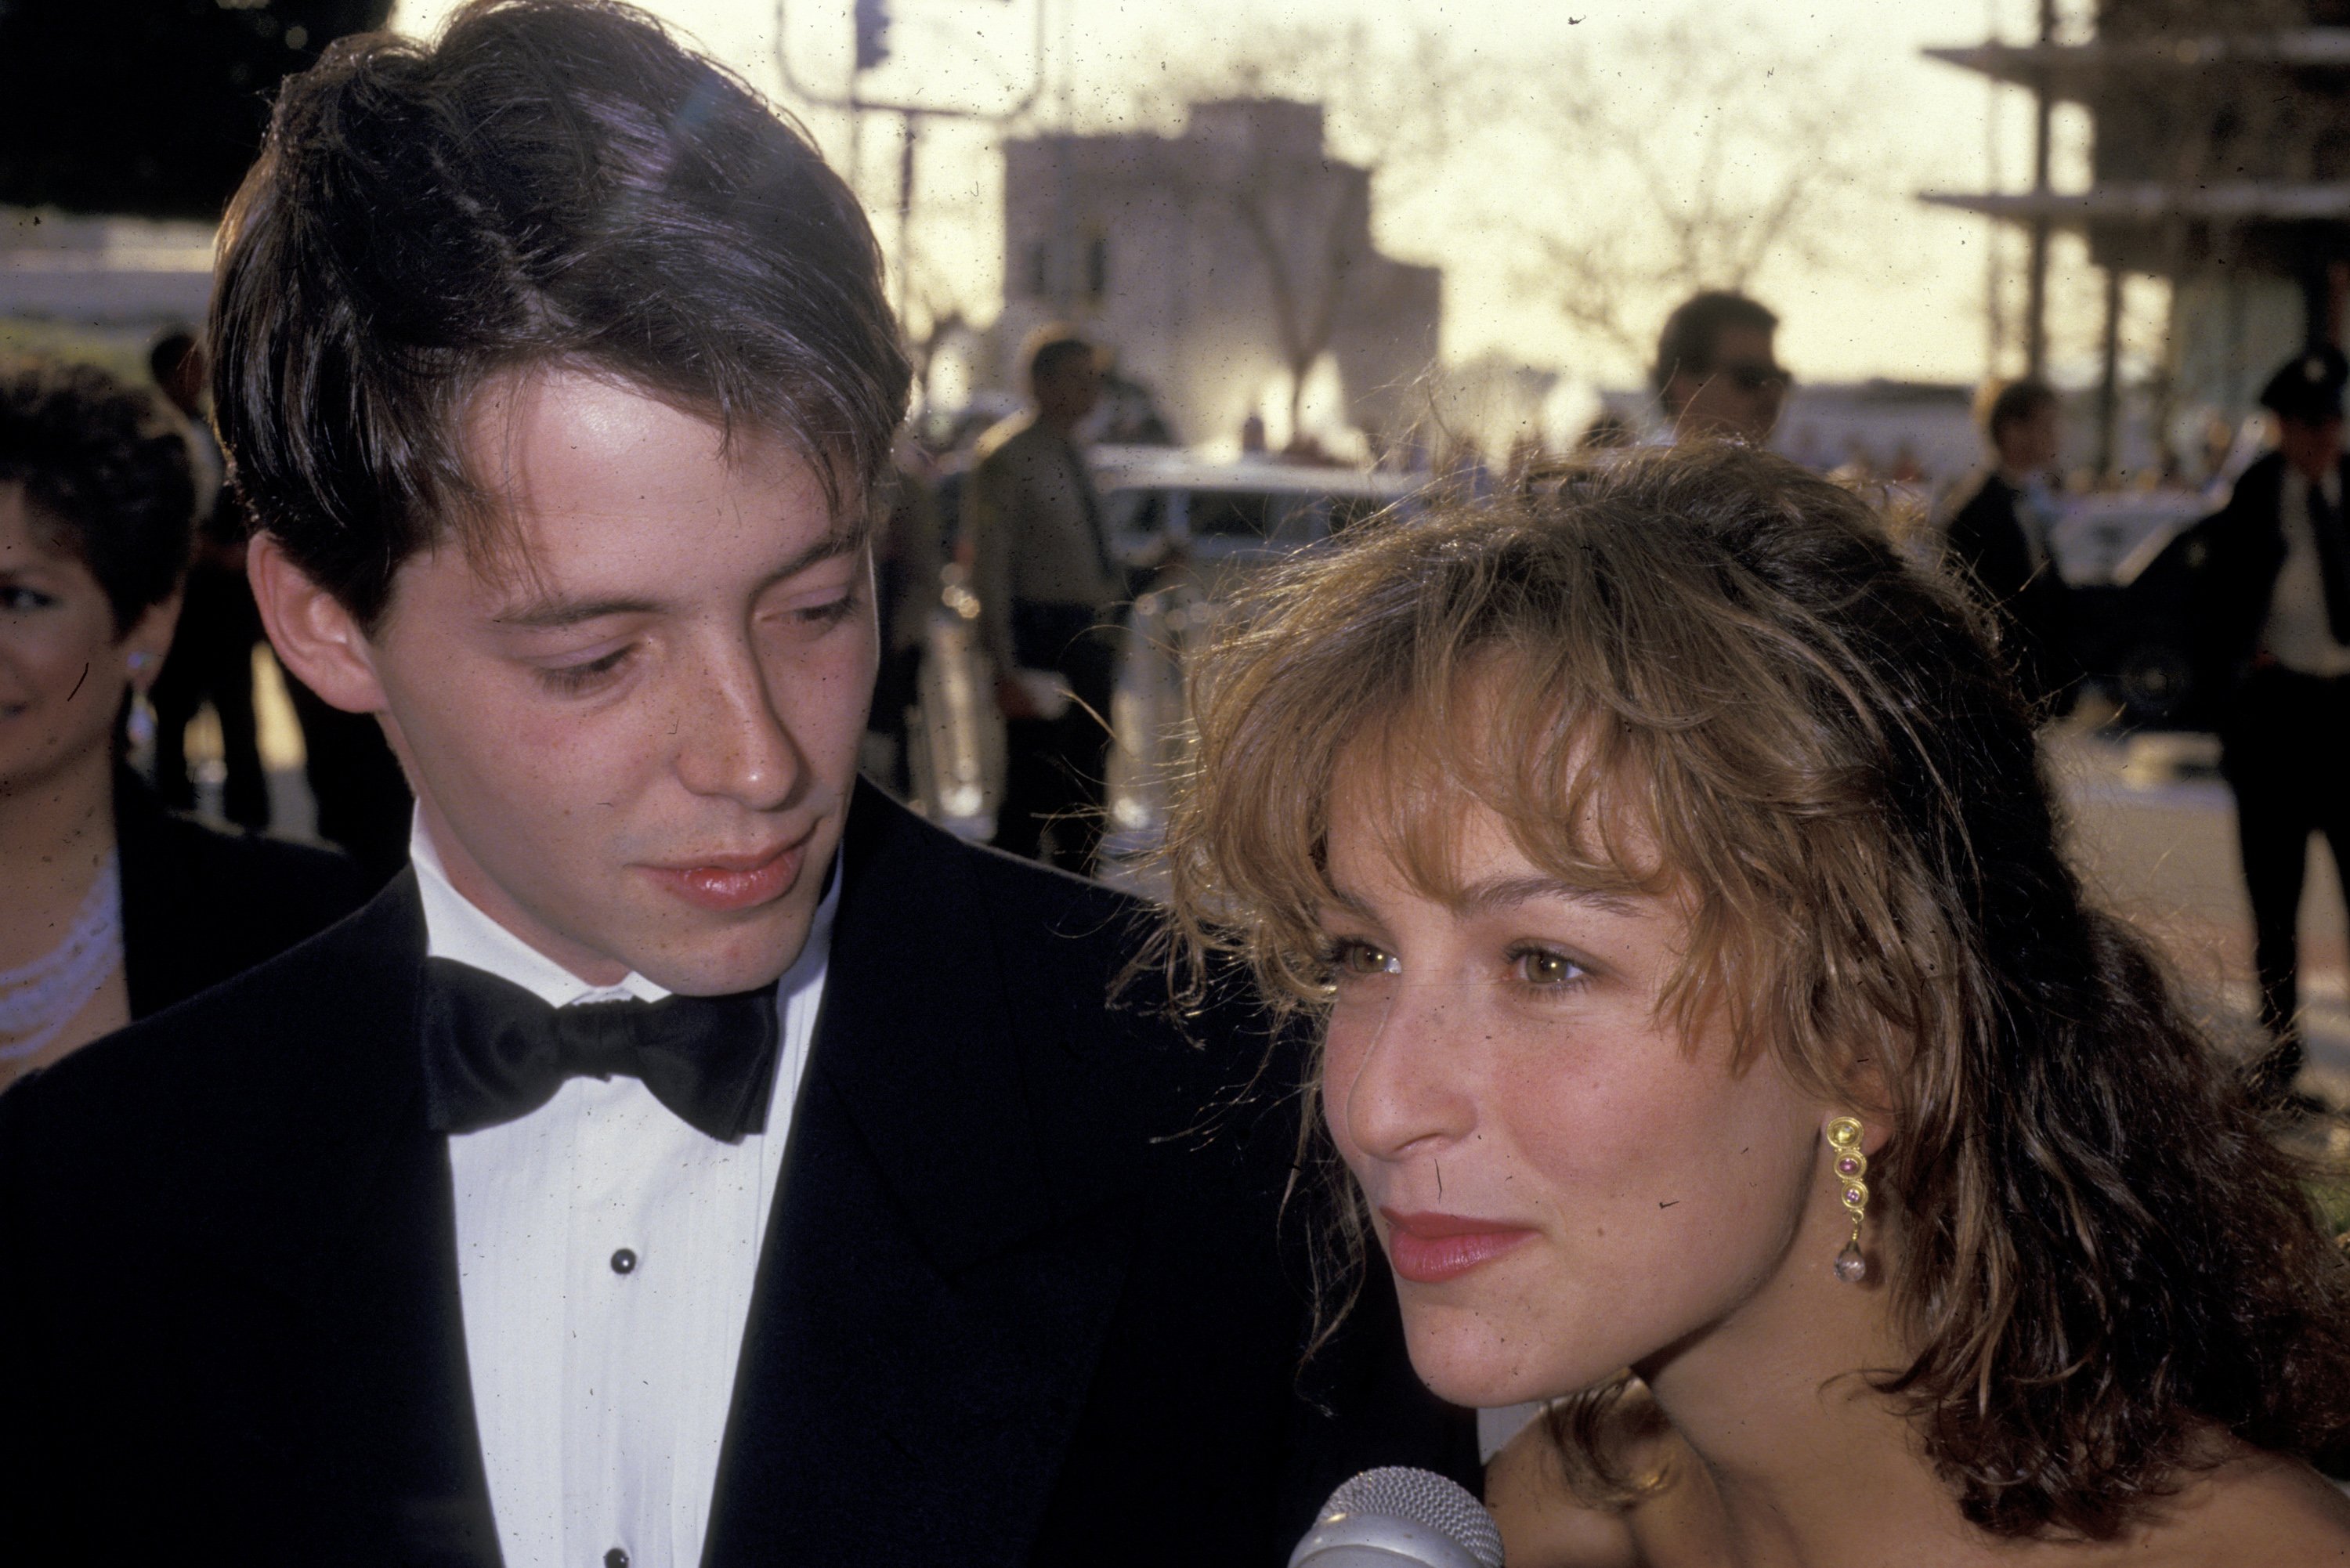 Matthew Broderick and Jennifer Grey at the 59th Annual Academy Awards on March 30, 1987 | Source: Getty Images